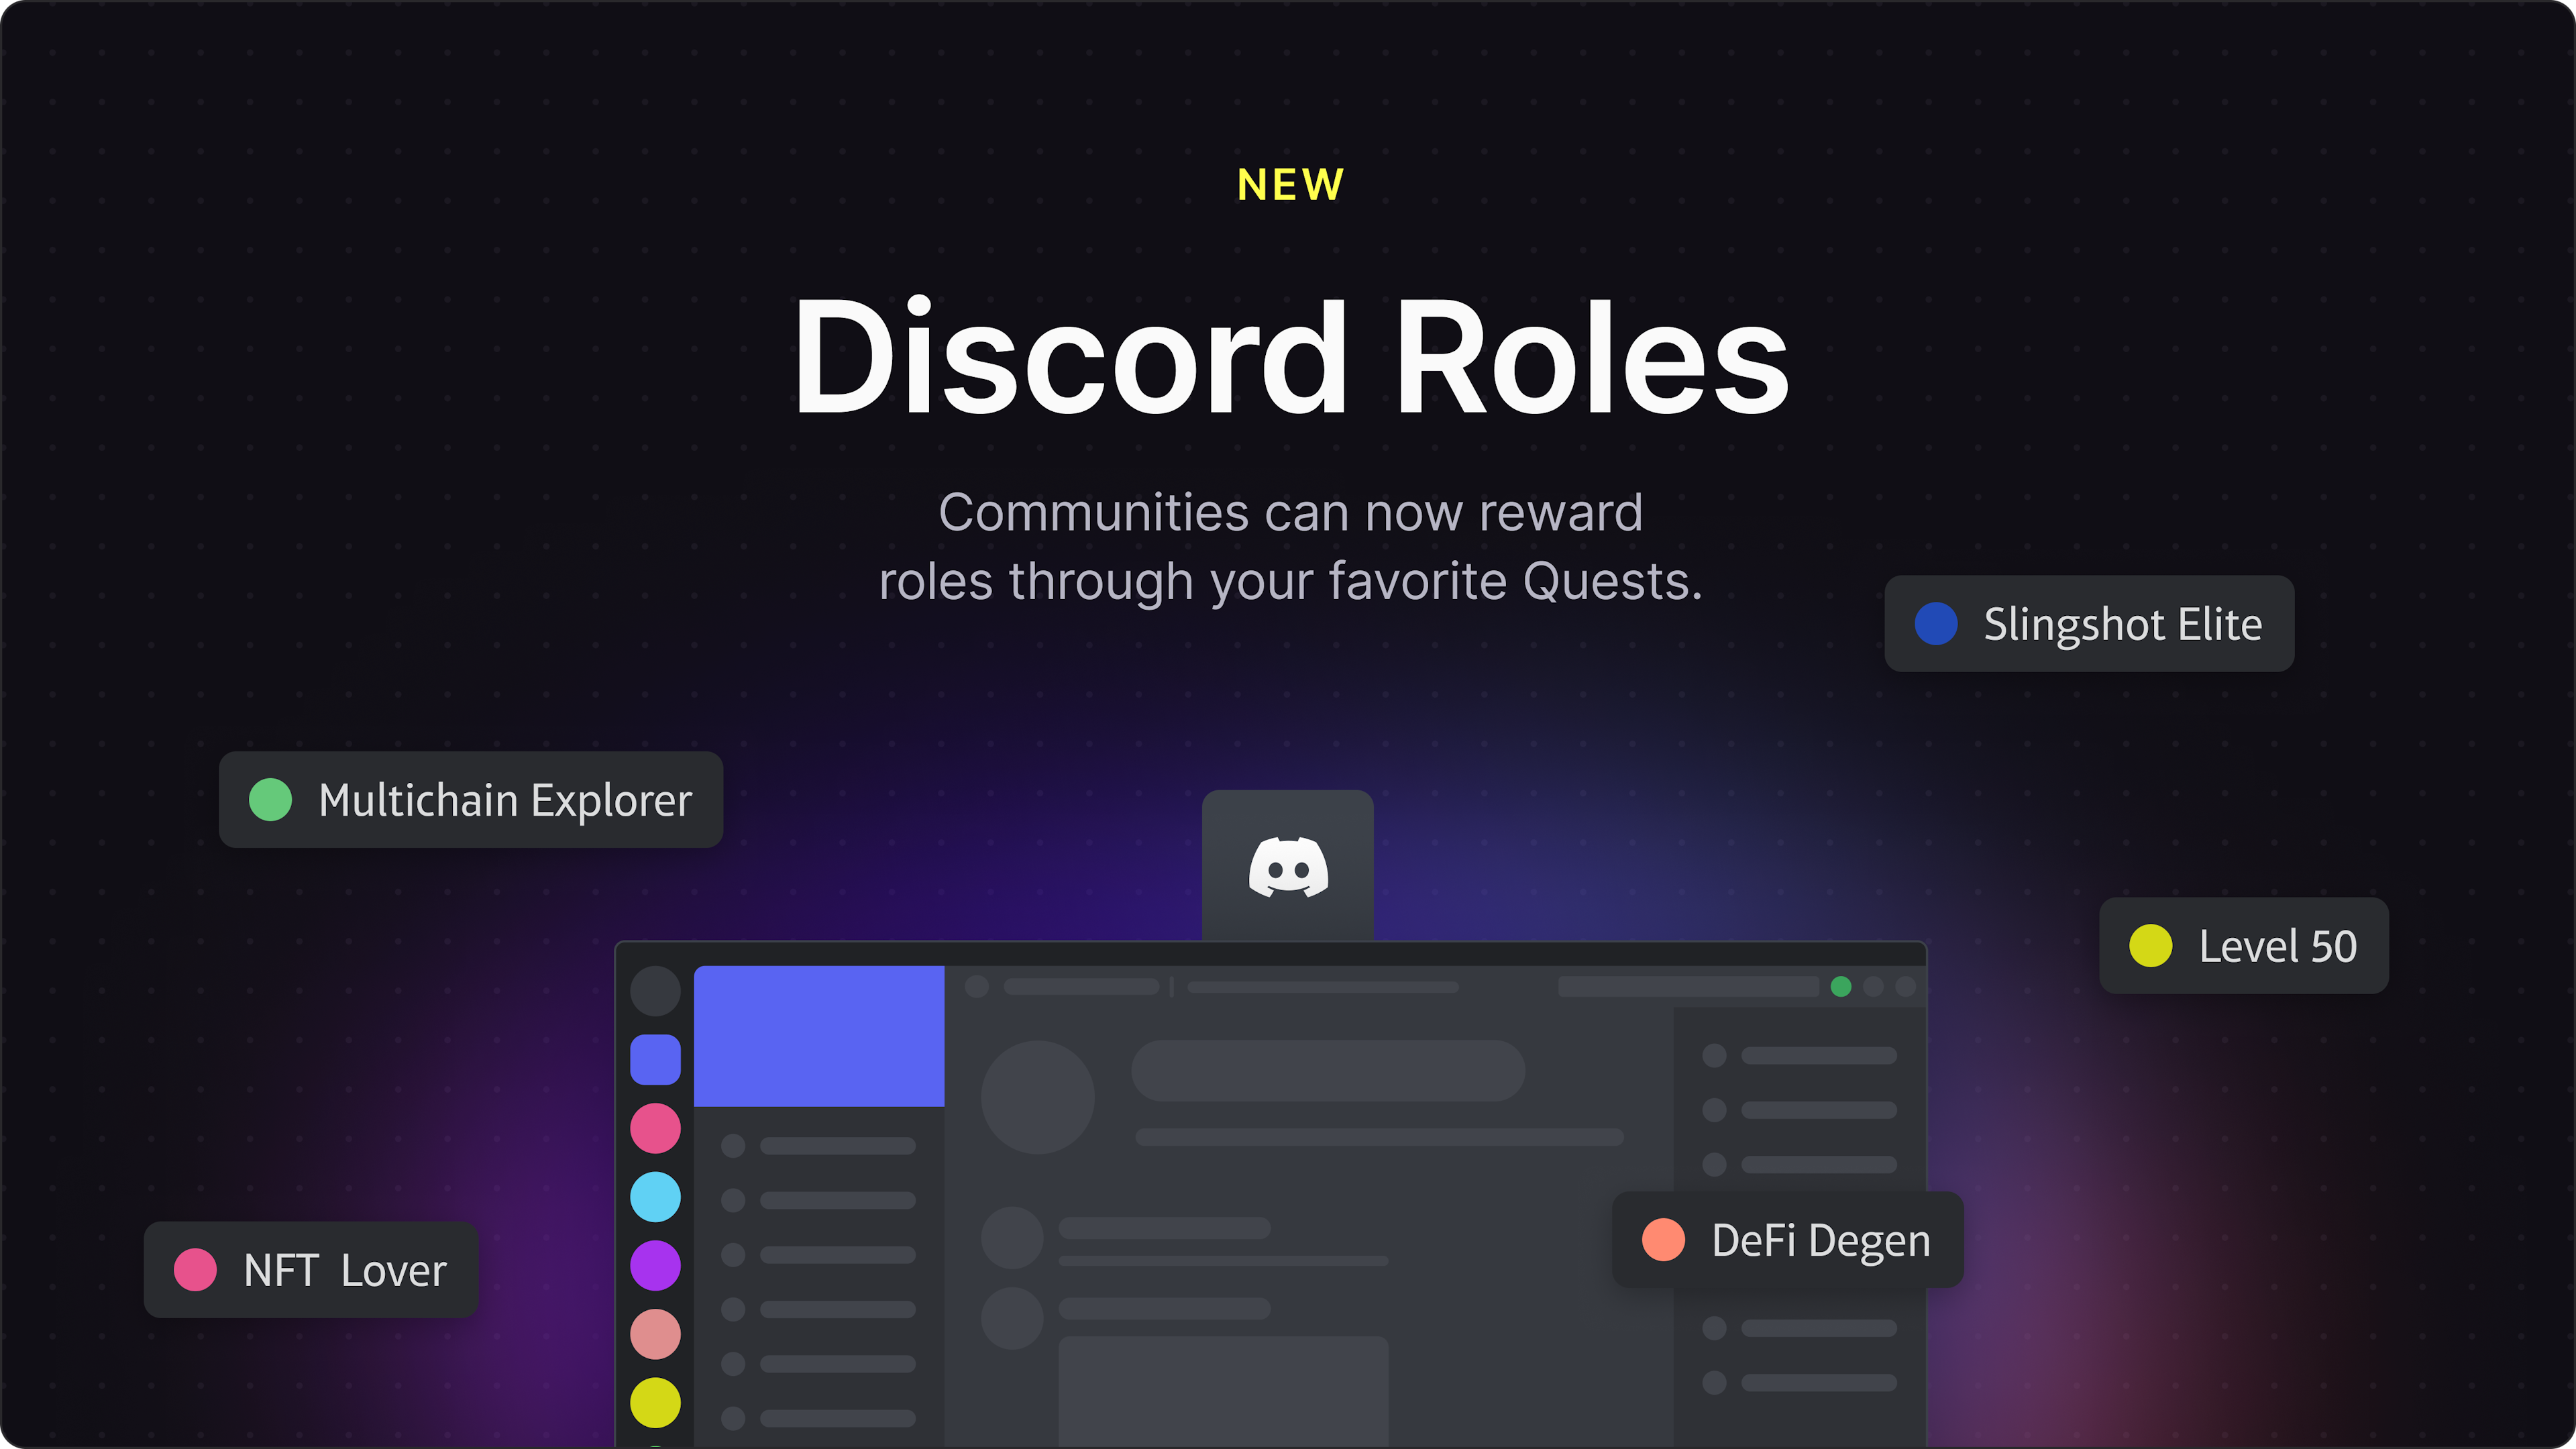 Partners can now reward Discord roles on Layer3.